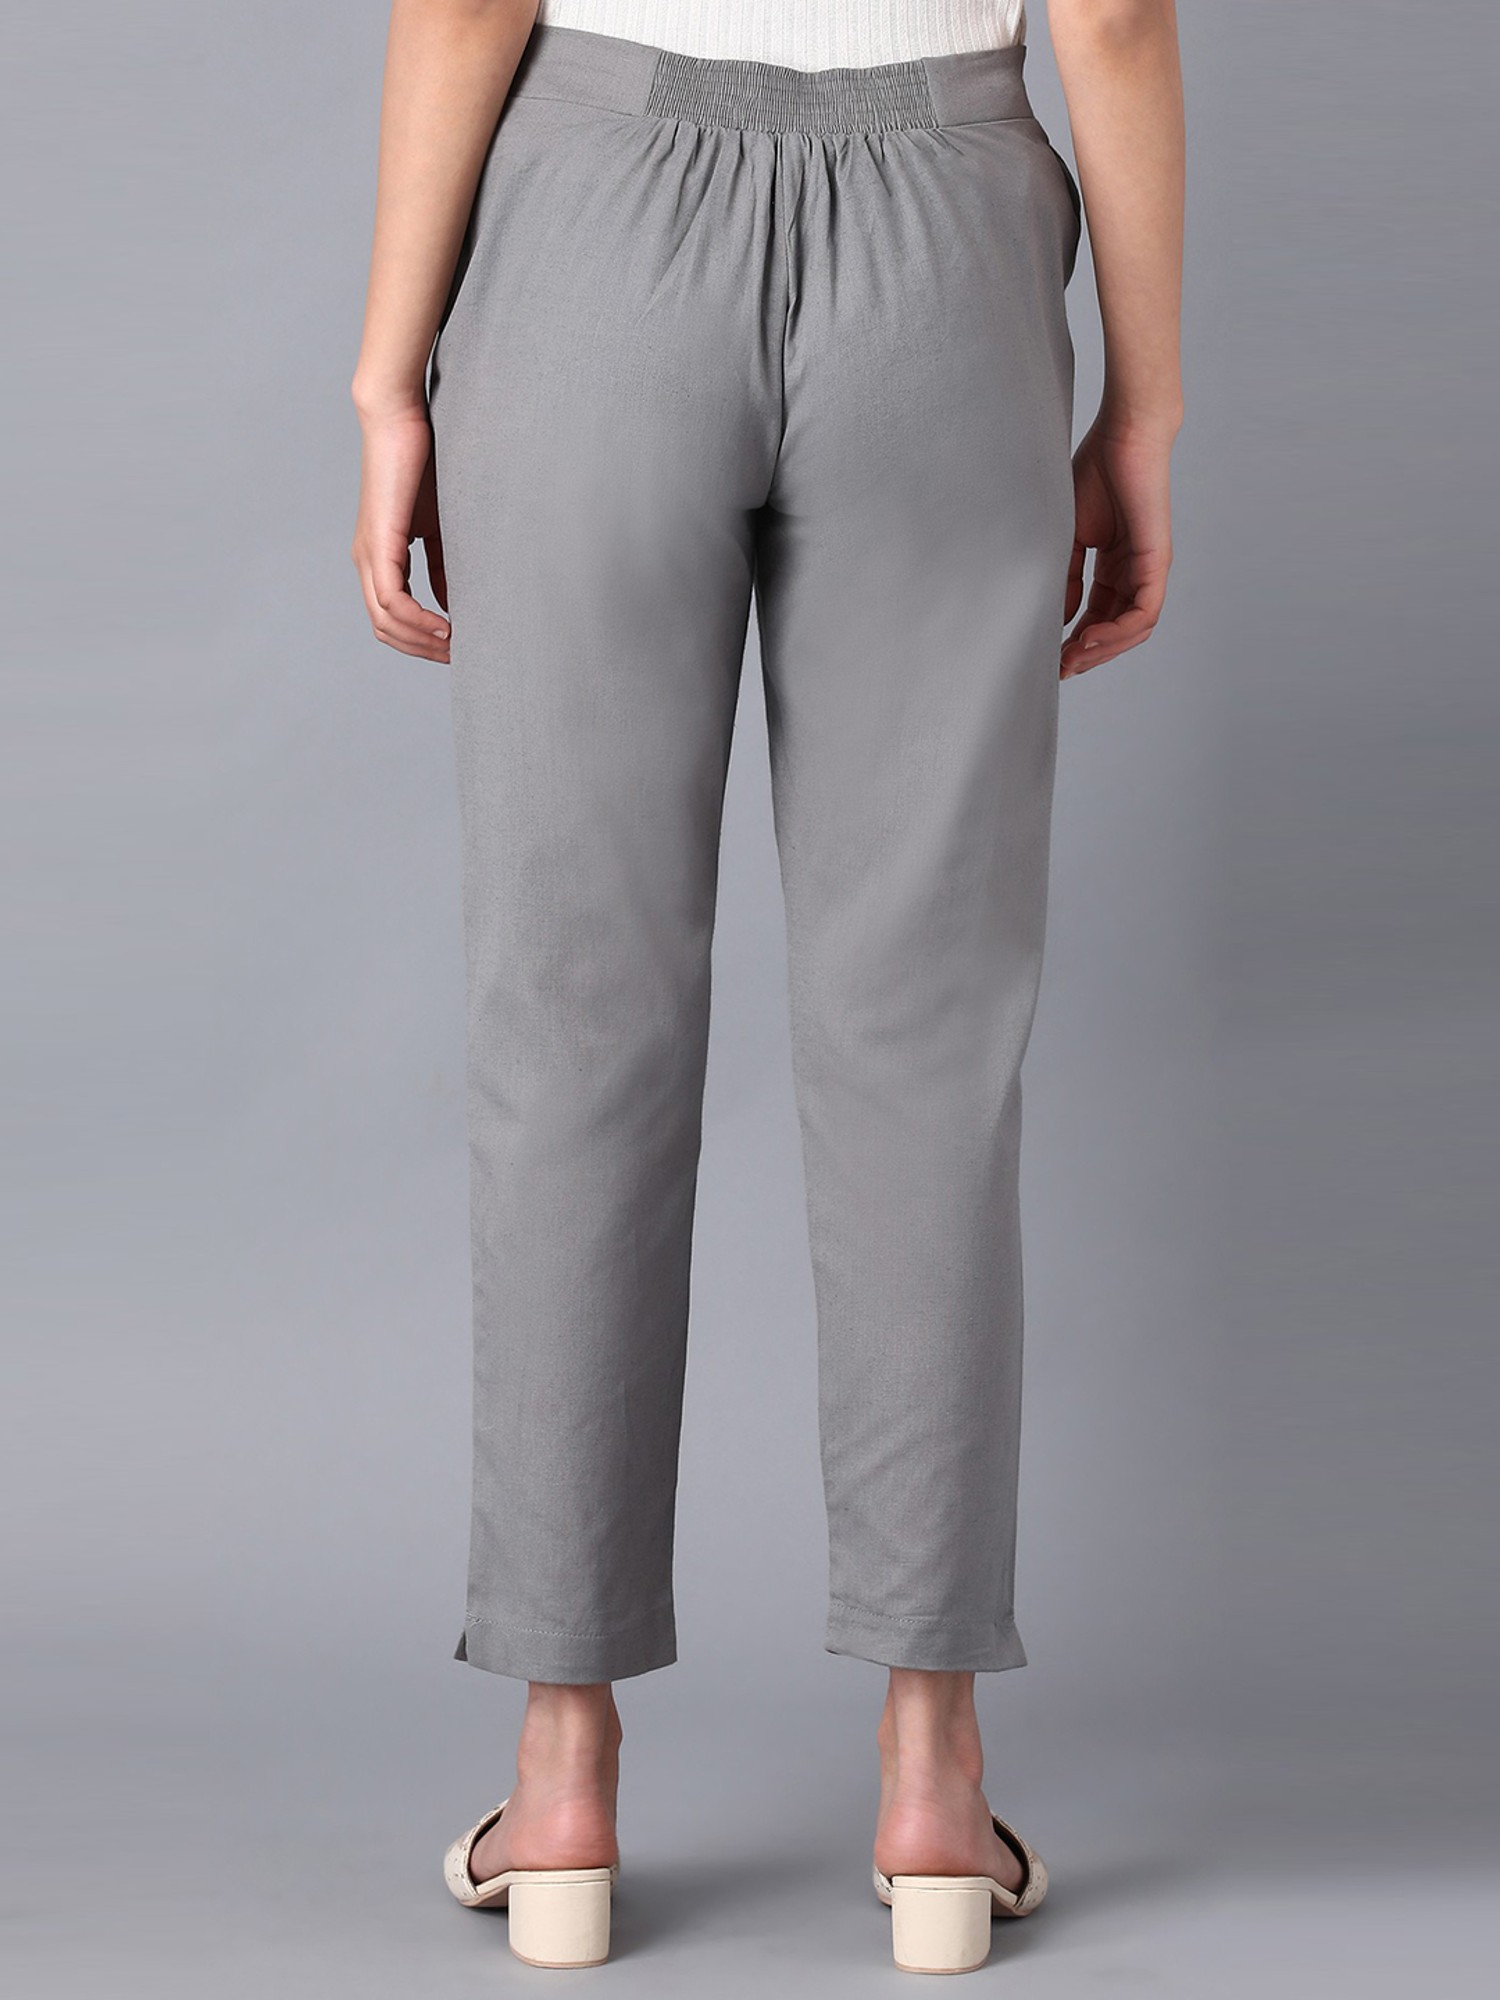 Slate Grey Women Cotton Pants casual and semi formal daily trousers-cheohanoi.vn